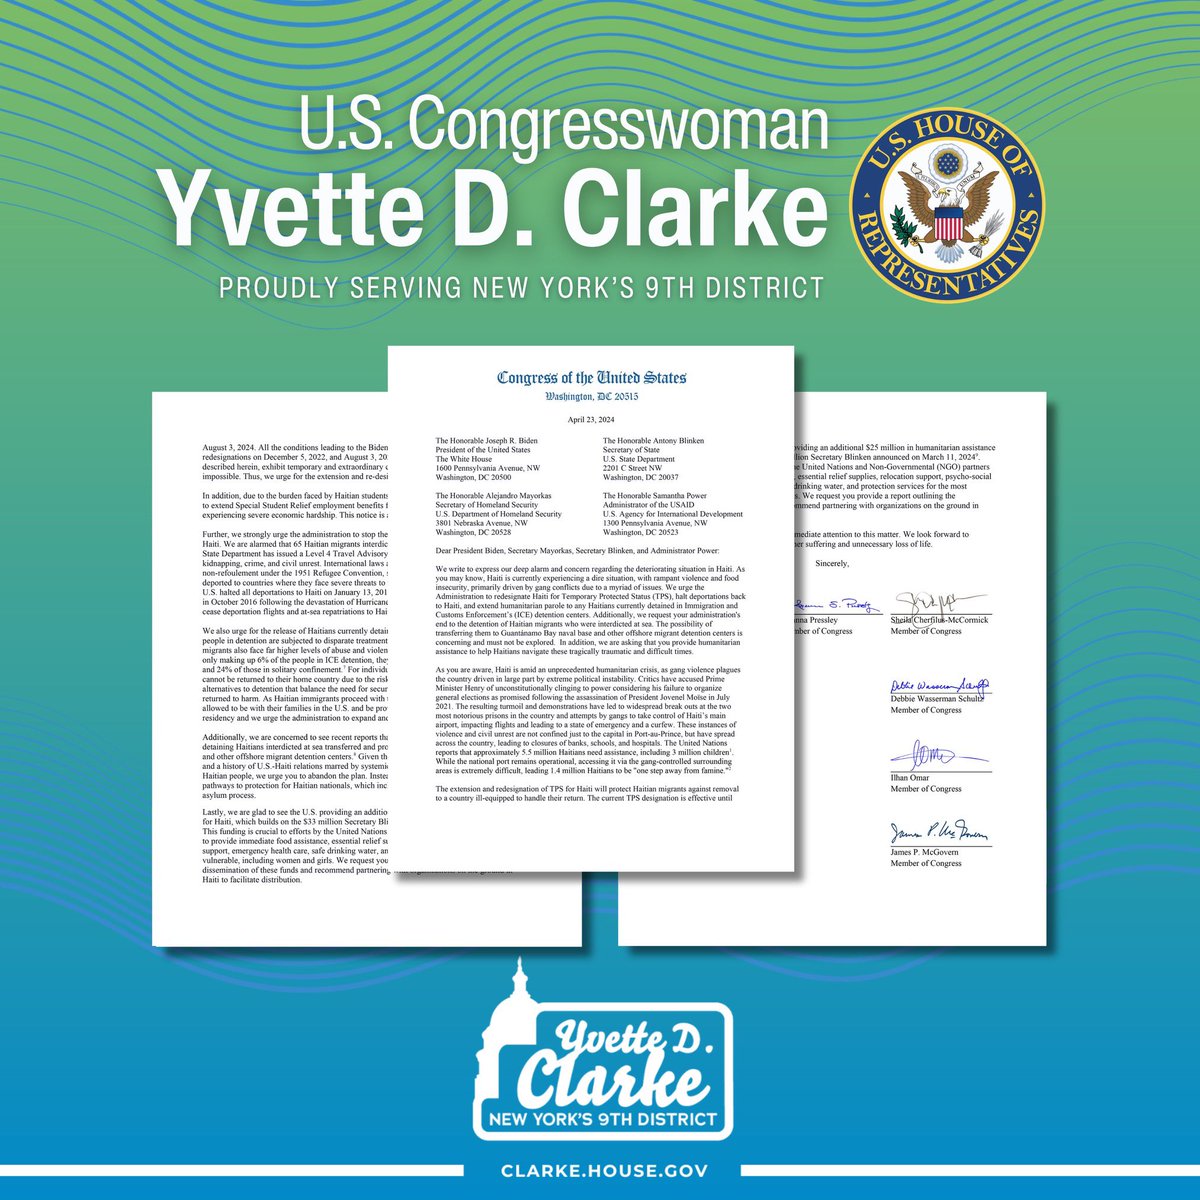 Today, I and my fellow Haiti Caucus Co-Chairs, @CongresswomanSC and @RepPressley, led 50 of our colleagues in a letter to the Biden Admin urging extended safeguards for Haitian migrants & the delivery of additional humanitarian assistance to Haiti. clarke.house.gov/clarke-and-hai…